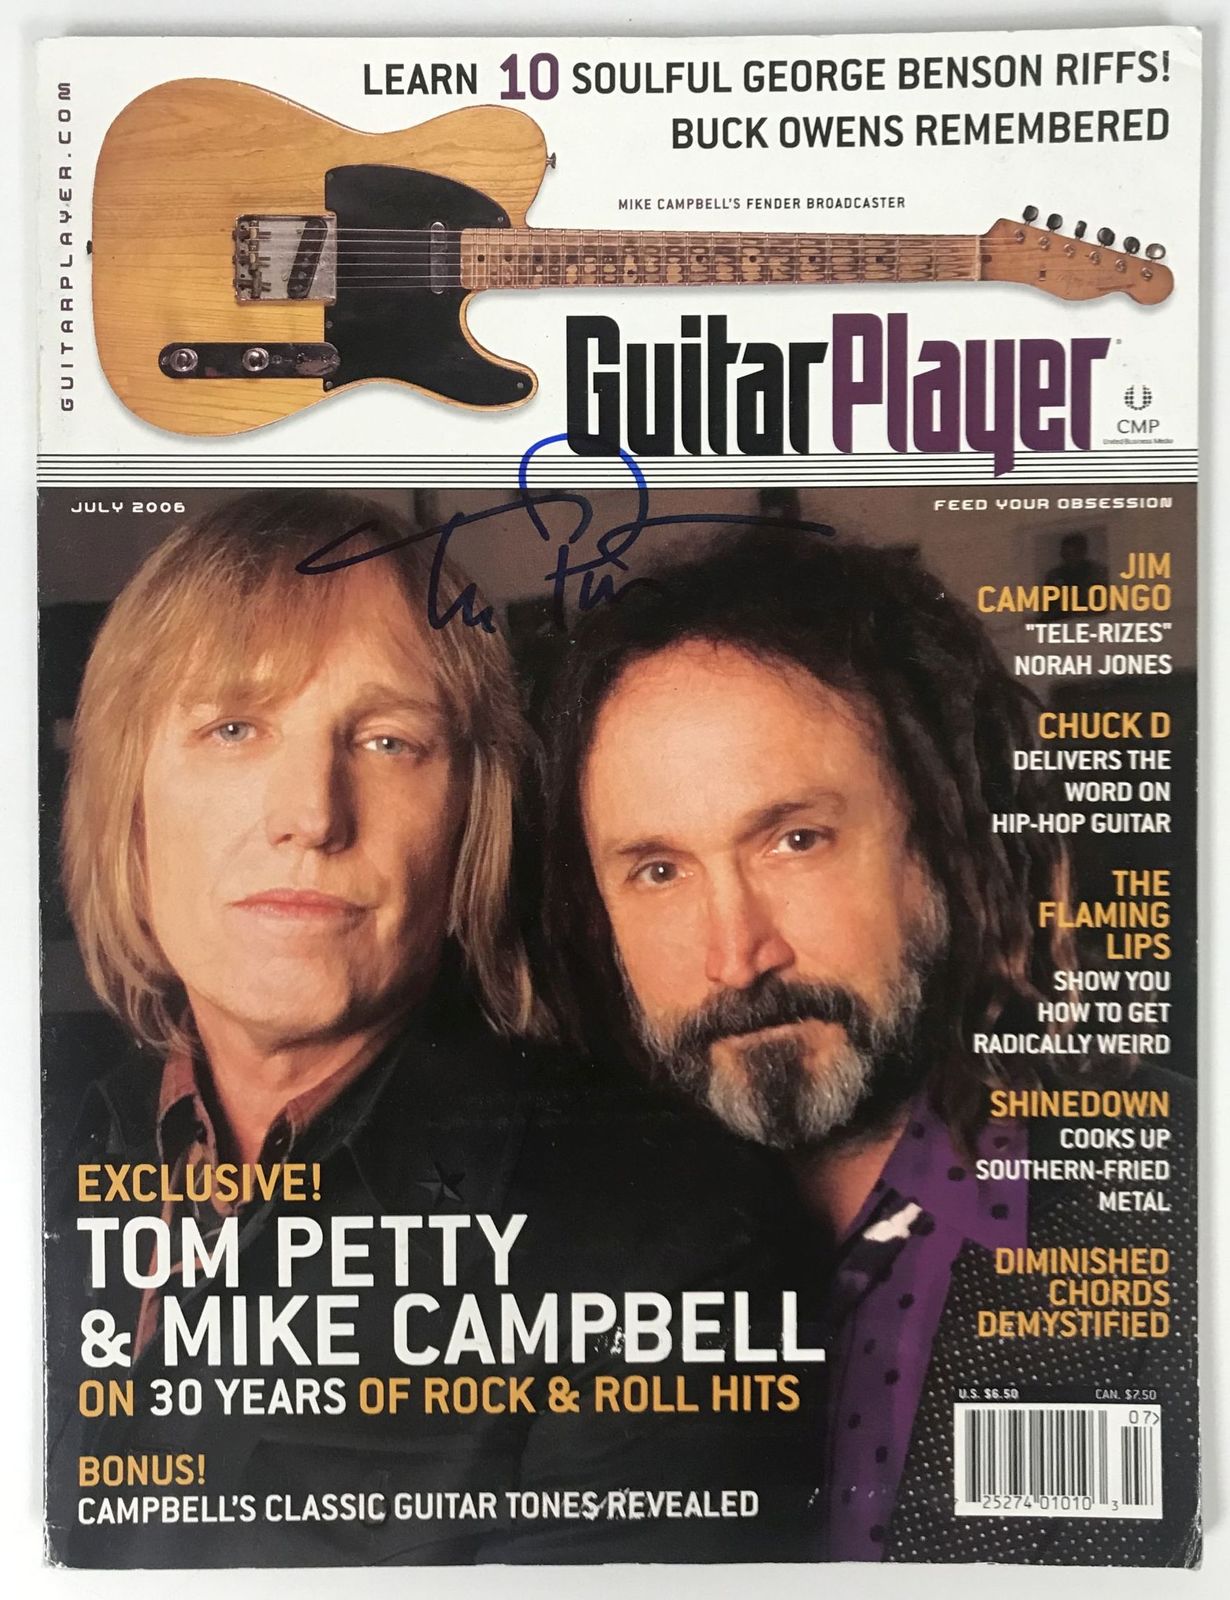 Tom Petty Signed Autographed Complete "Guitar Player" Magazine - Lifetime COA - $499.99